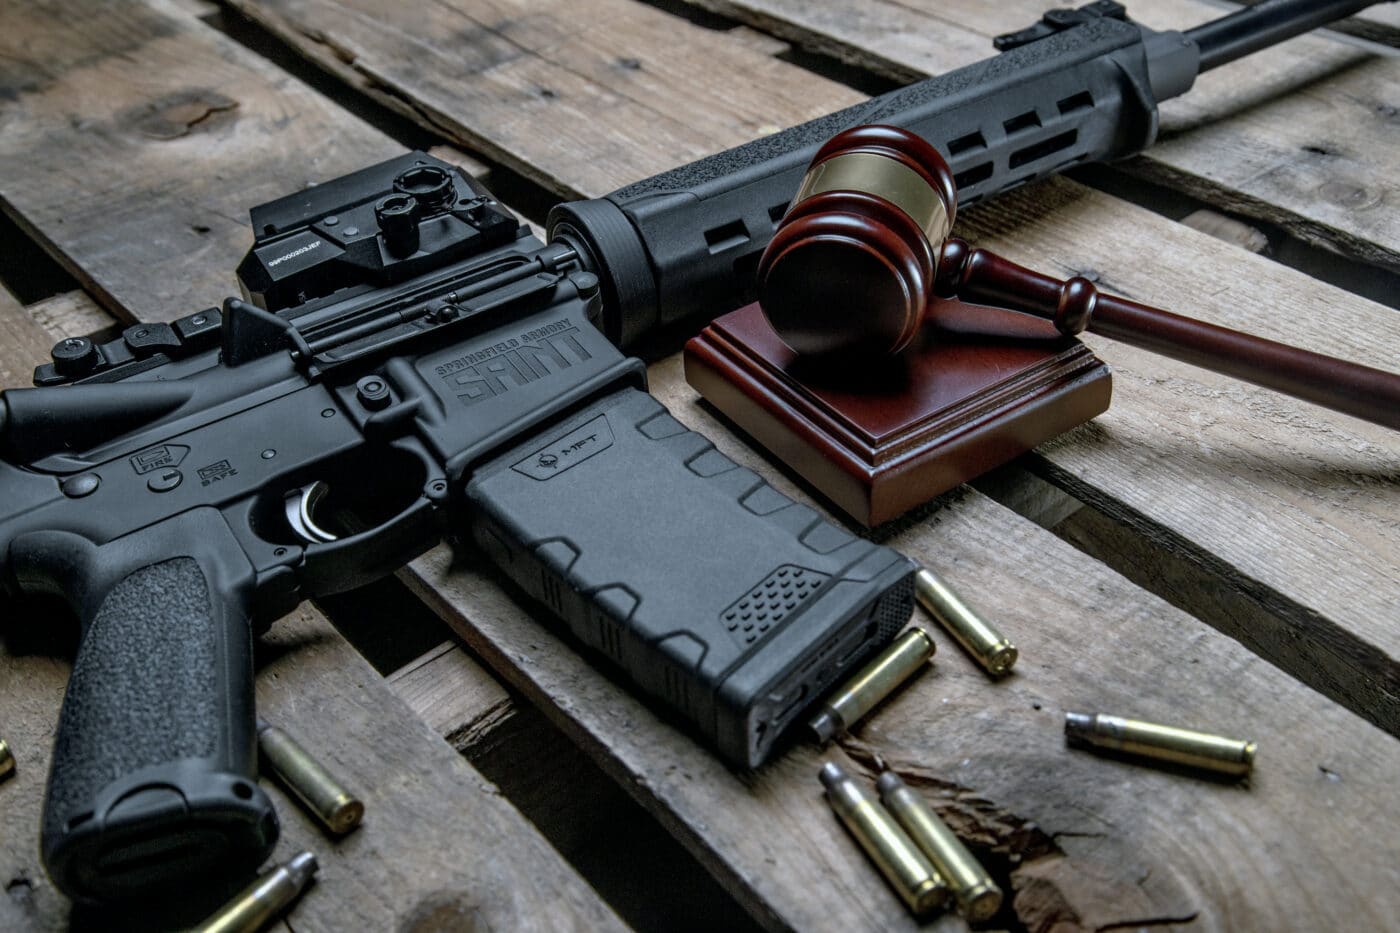 AR rifle next to ammo and gavel